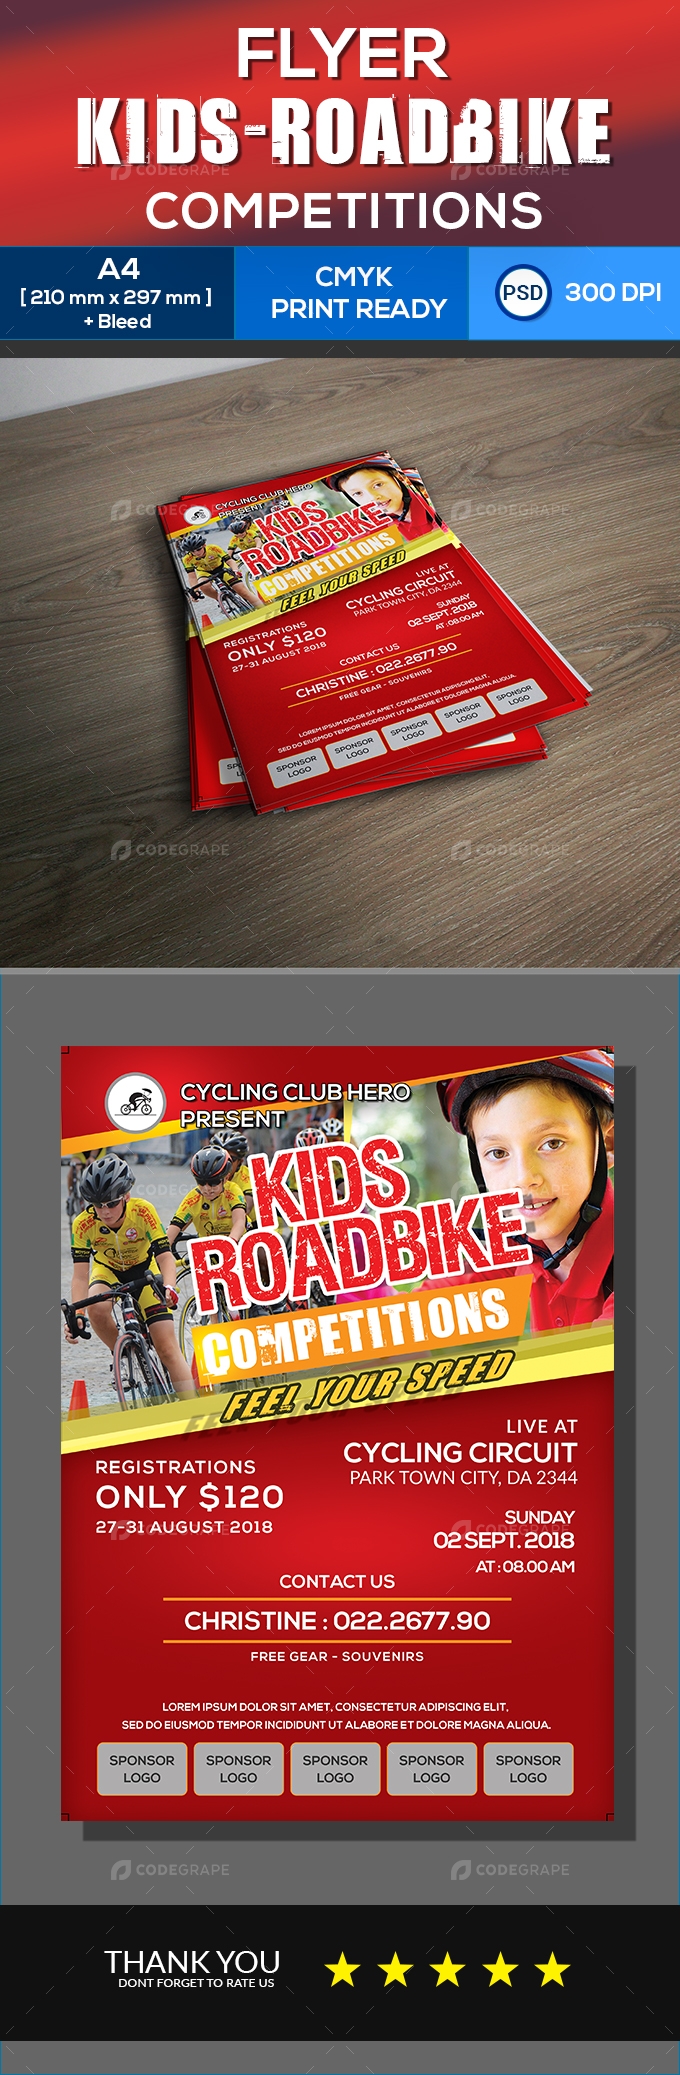 Kids Roadbike Competitions Flyer